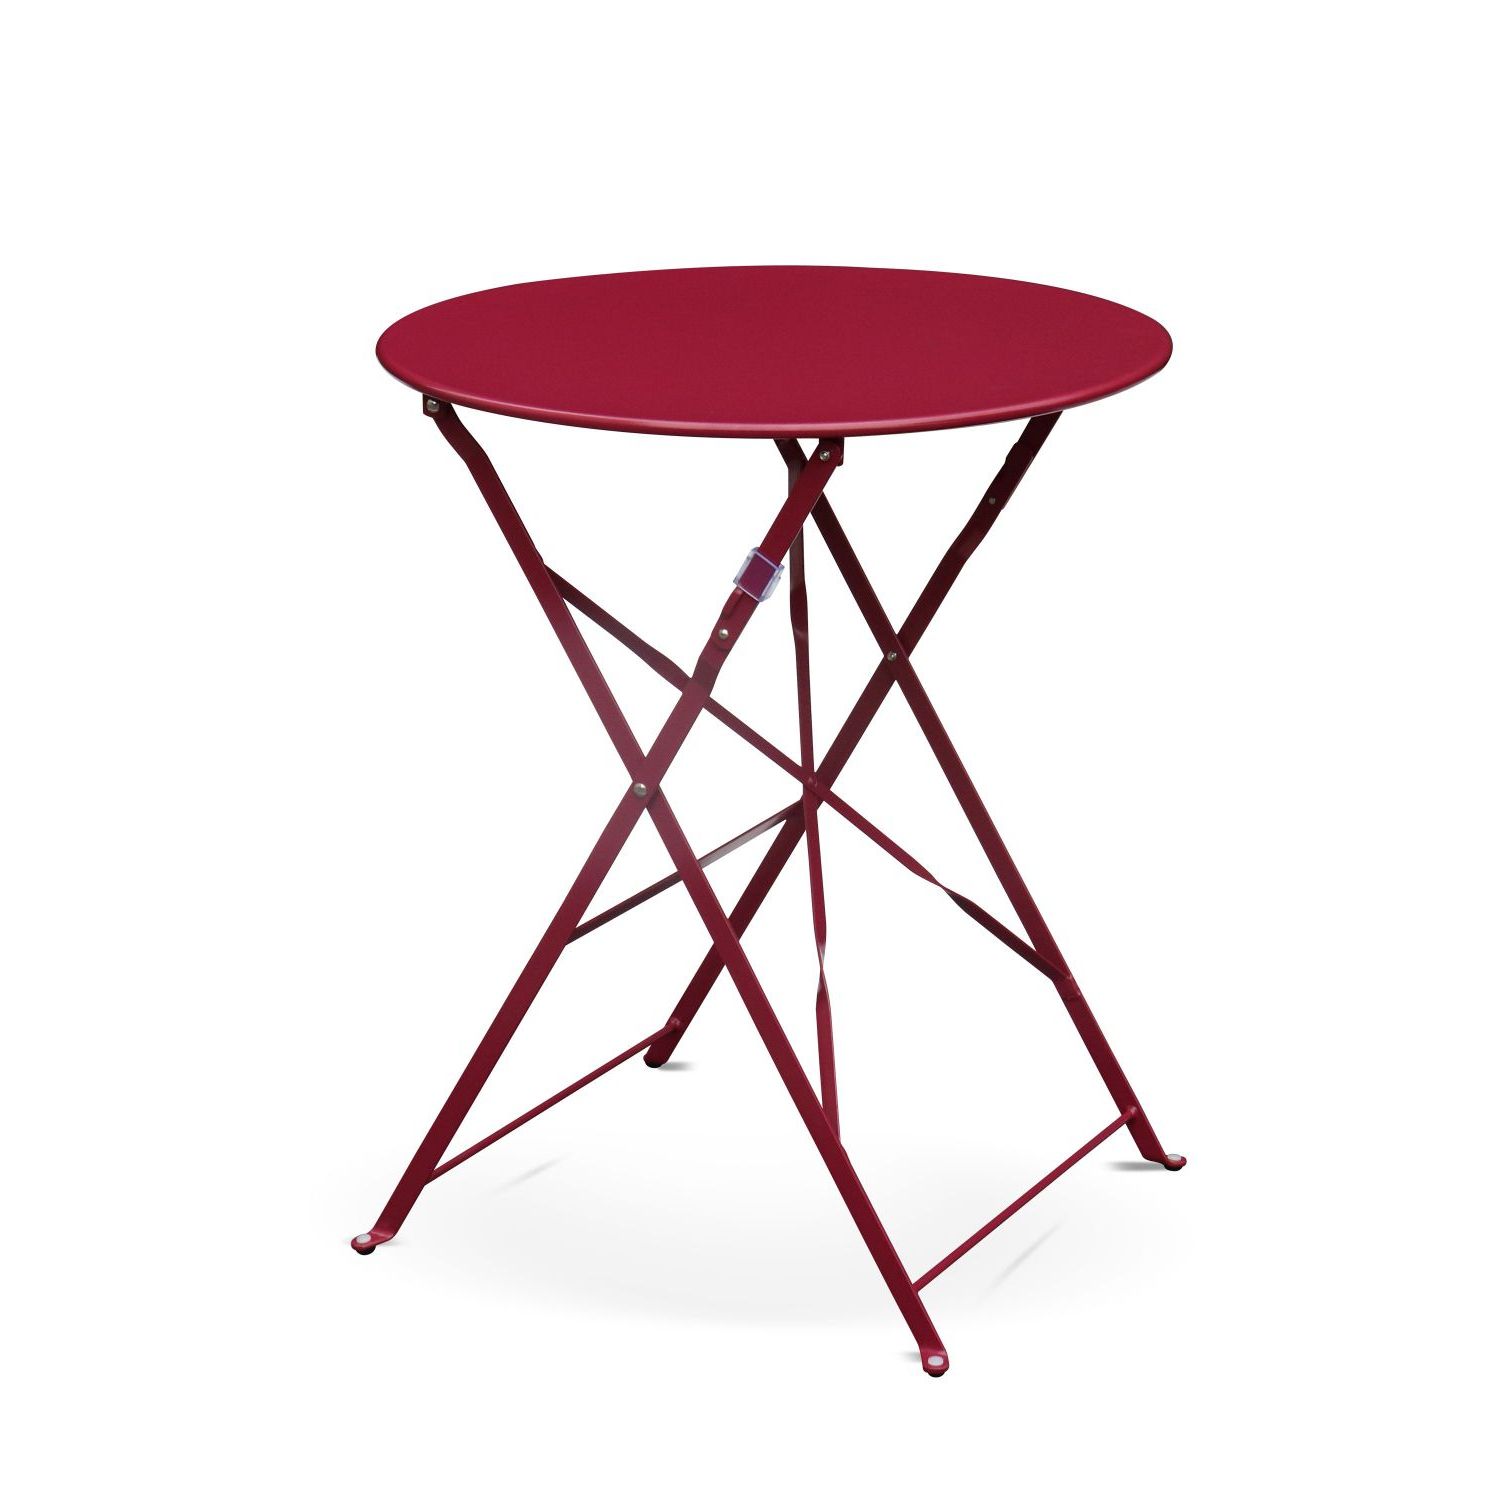 Red Metal Outdoor Table And Chairs Sets With Regard To Current Foldable Wine Red Emilia Bistro Garden Set, Ø60cm Round Table With Two (View 11 of 15)